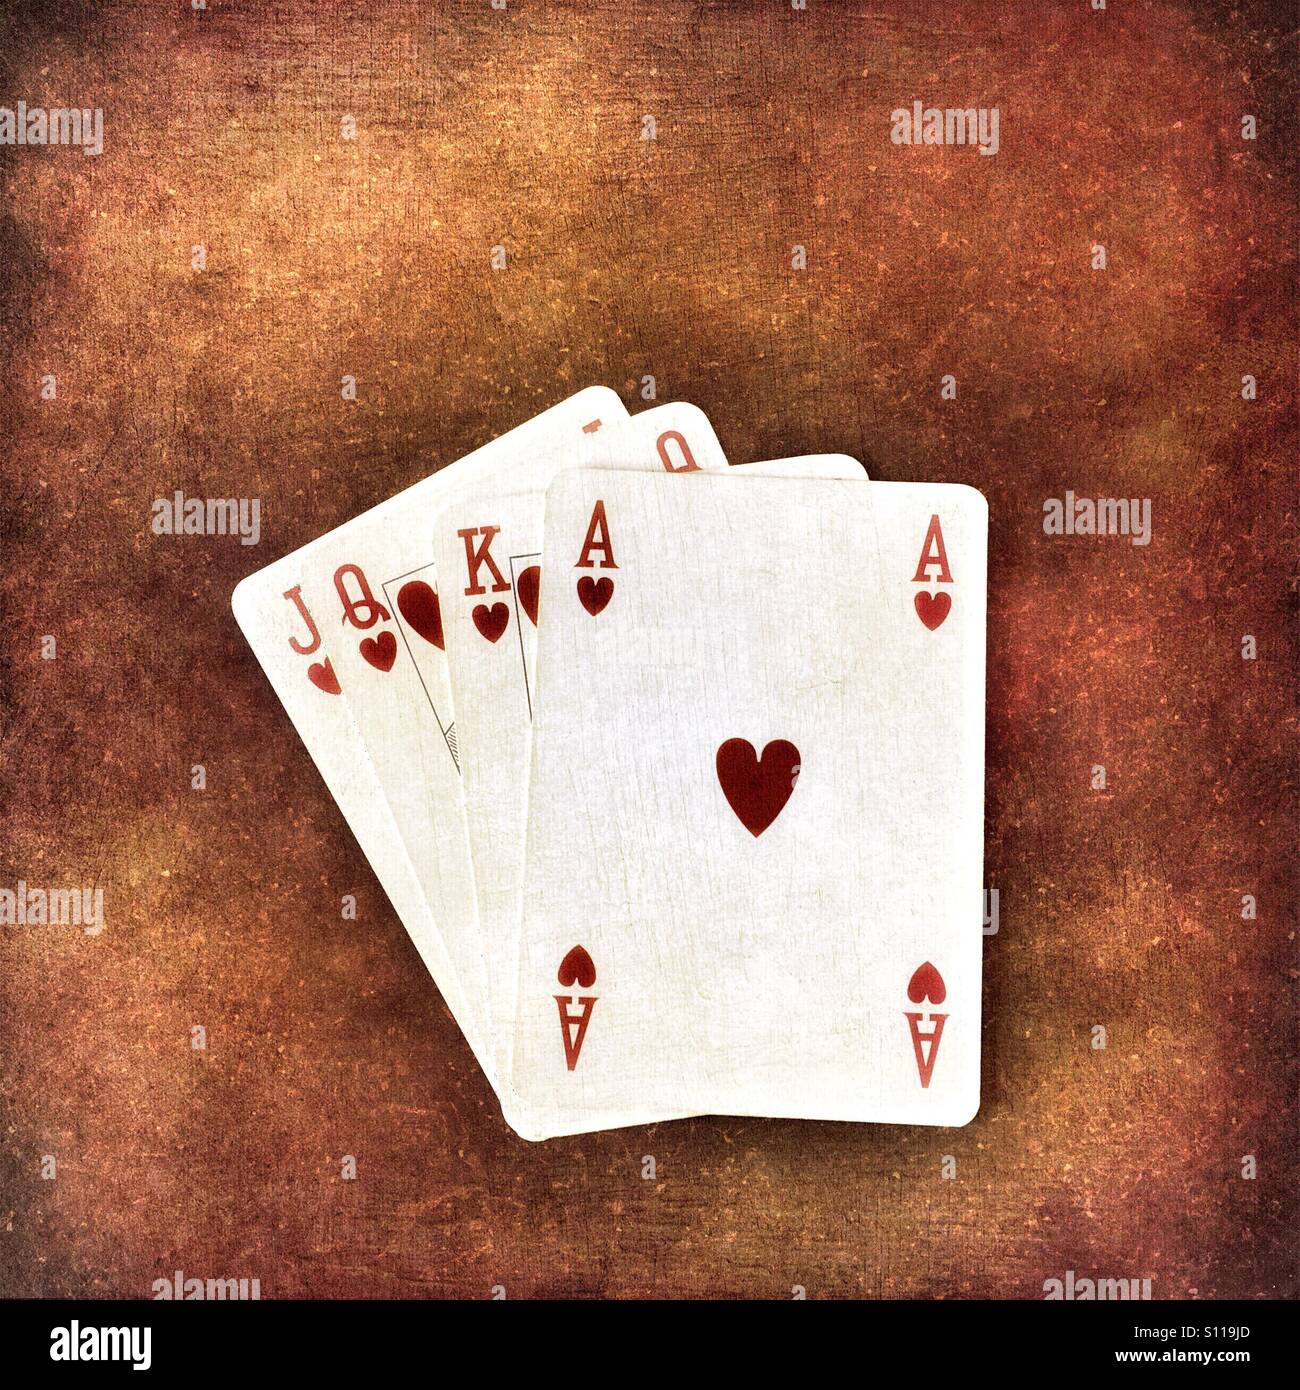 Ace, King, Queen and Jack of Hearts playing cards on a grungy background Stock Photo